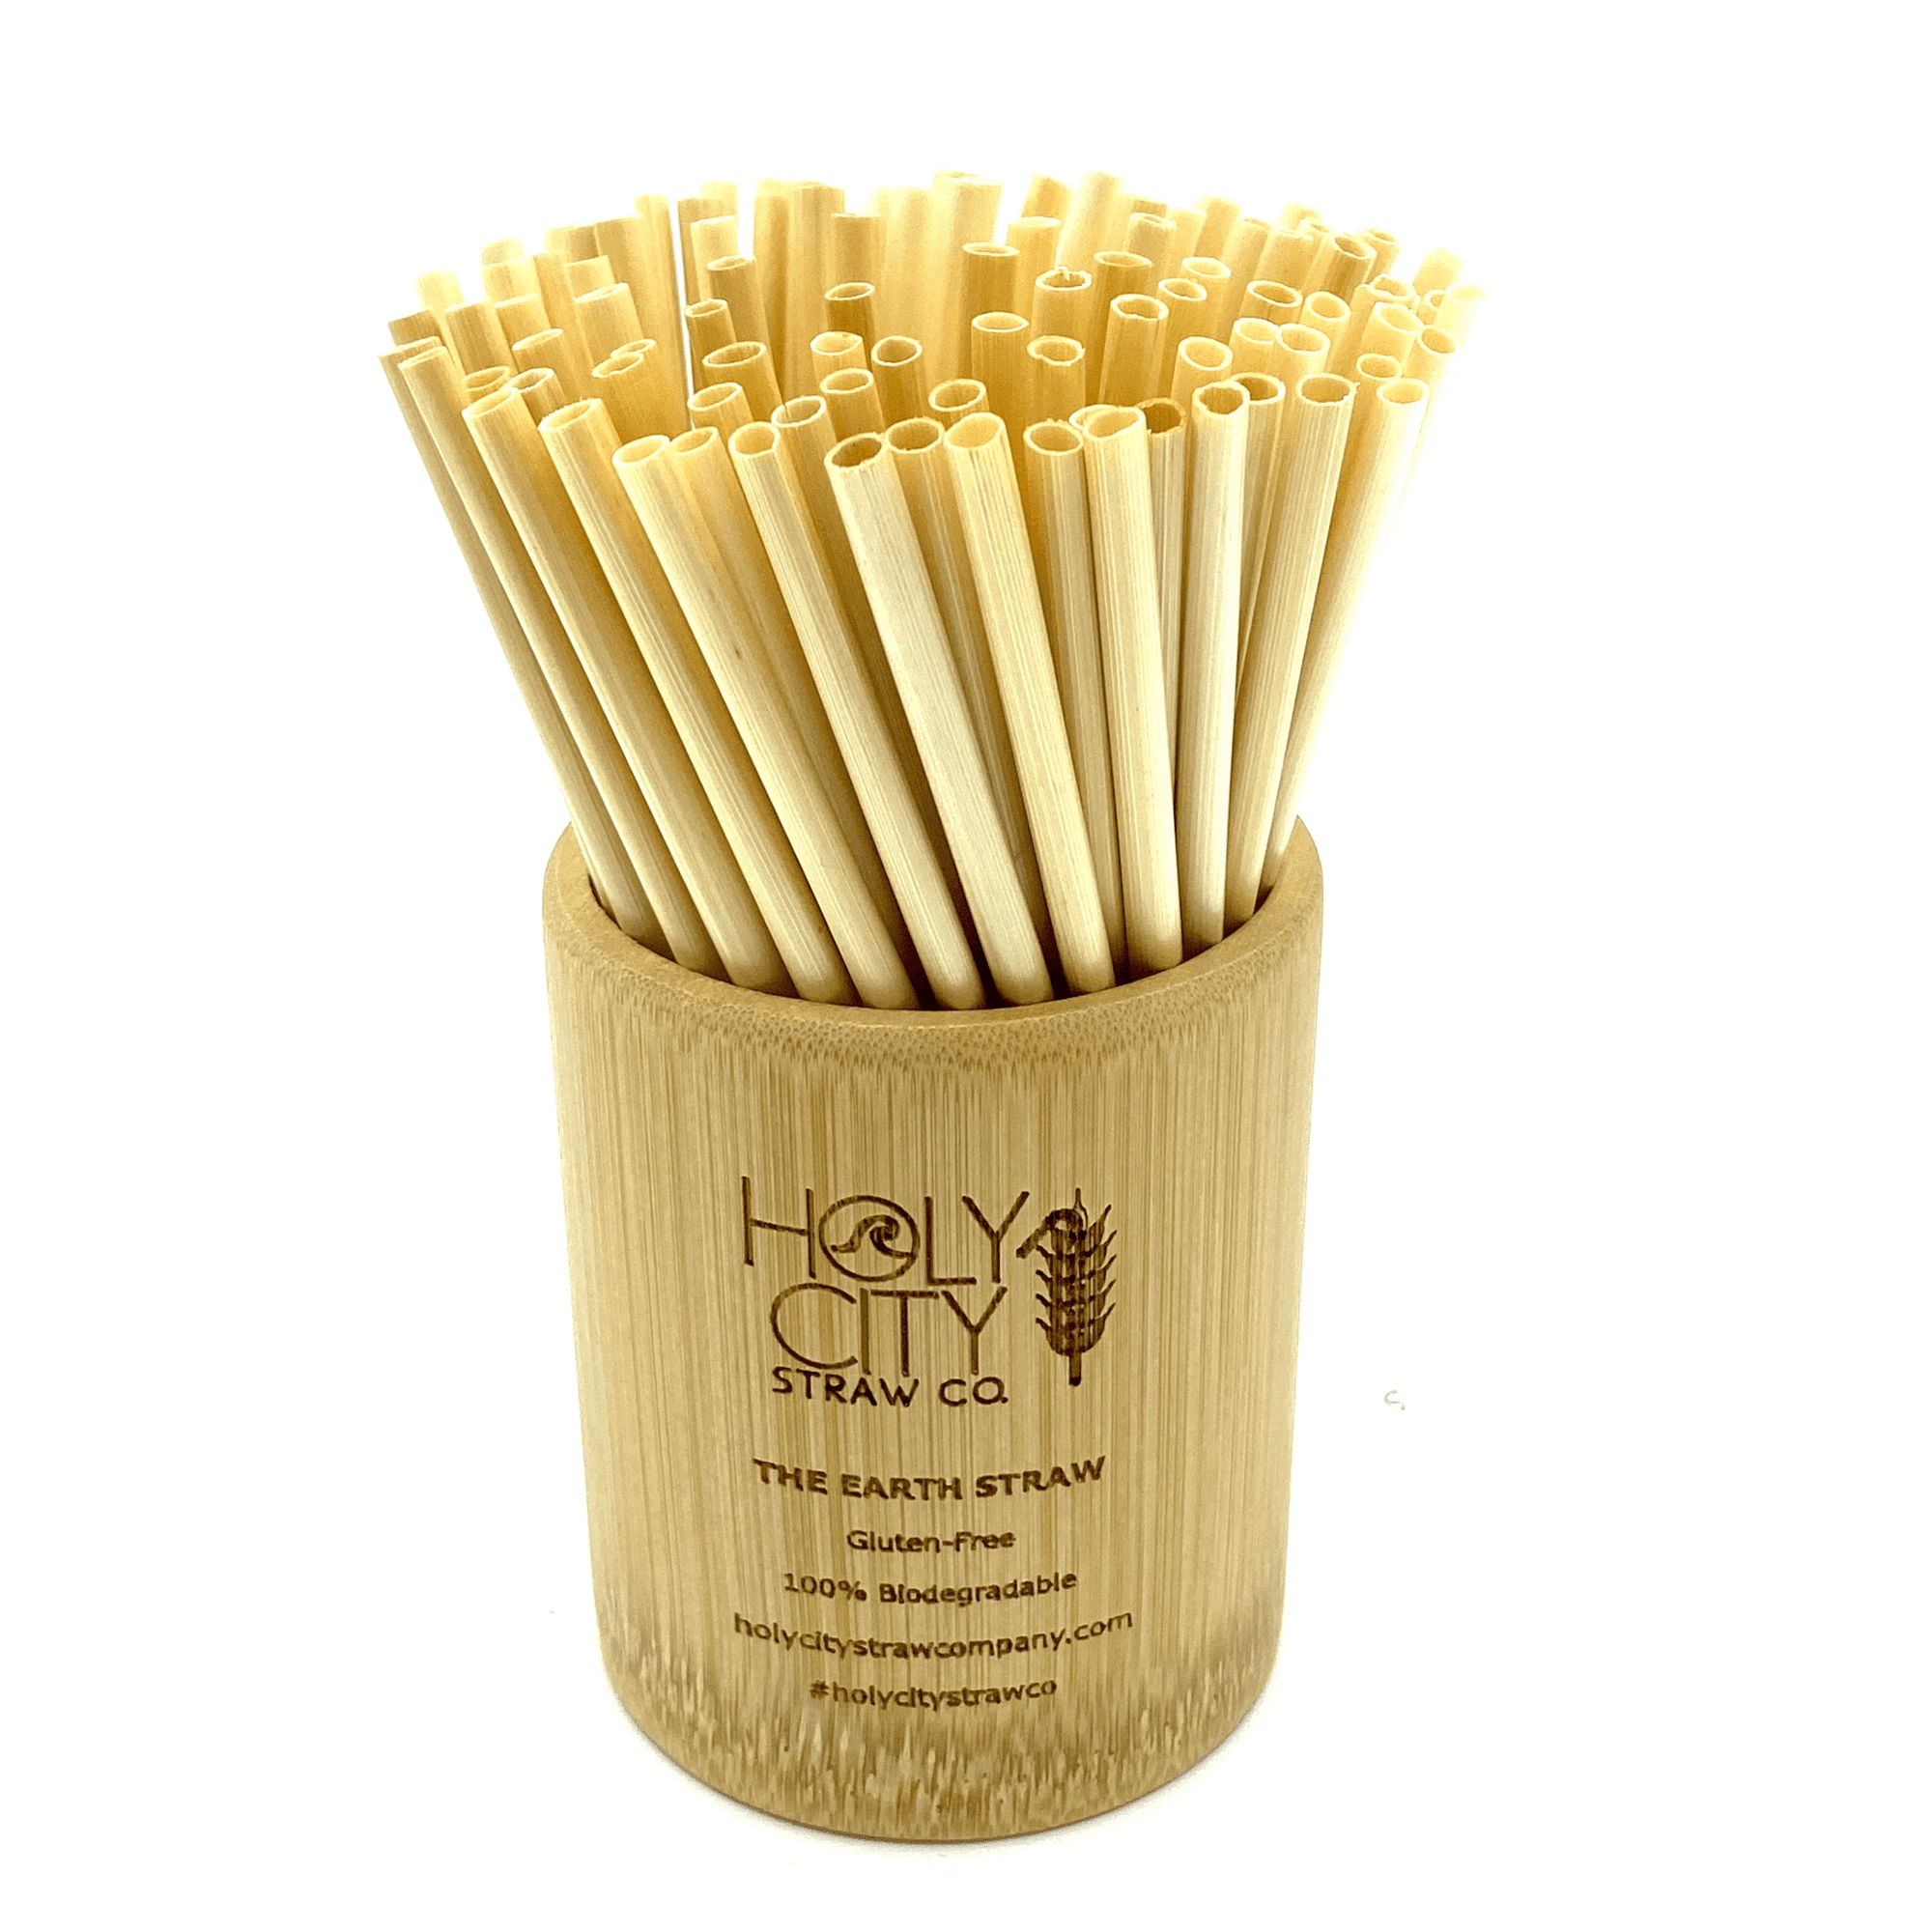 Holy City Straw Company Branded Straw Holder with Cocktail wheat stem straws inside of the cup